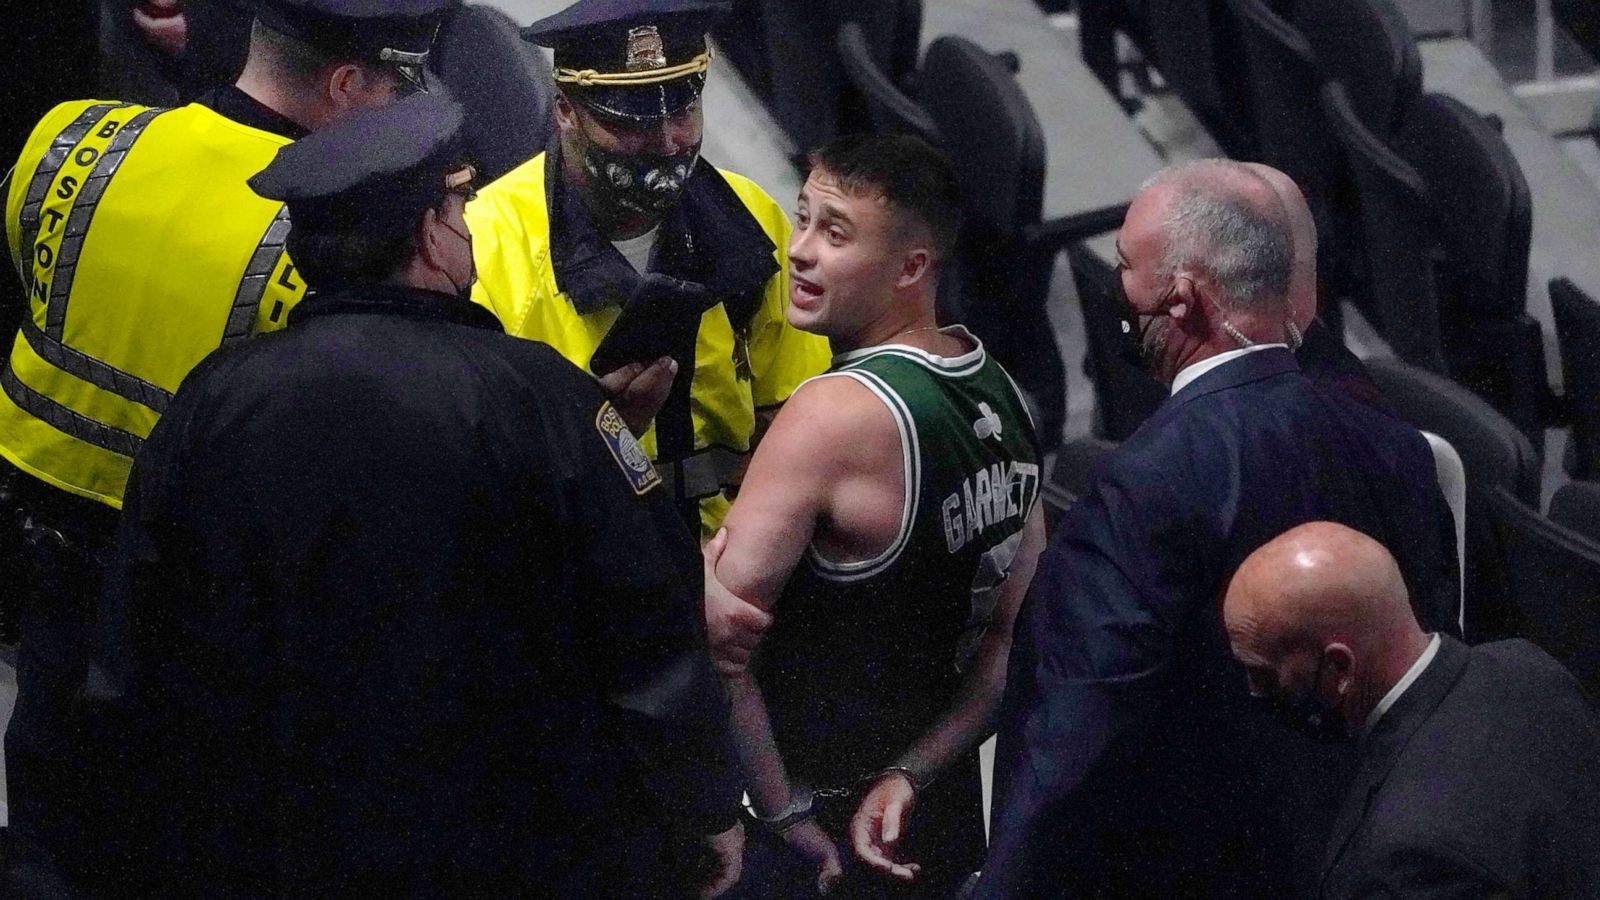 For NBA flops, let players police themselves? - The Boston Globe